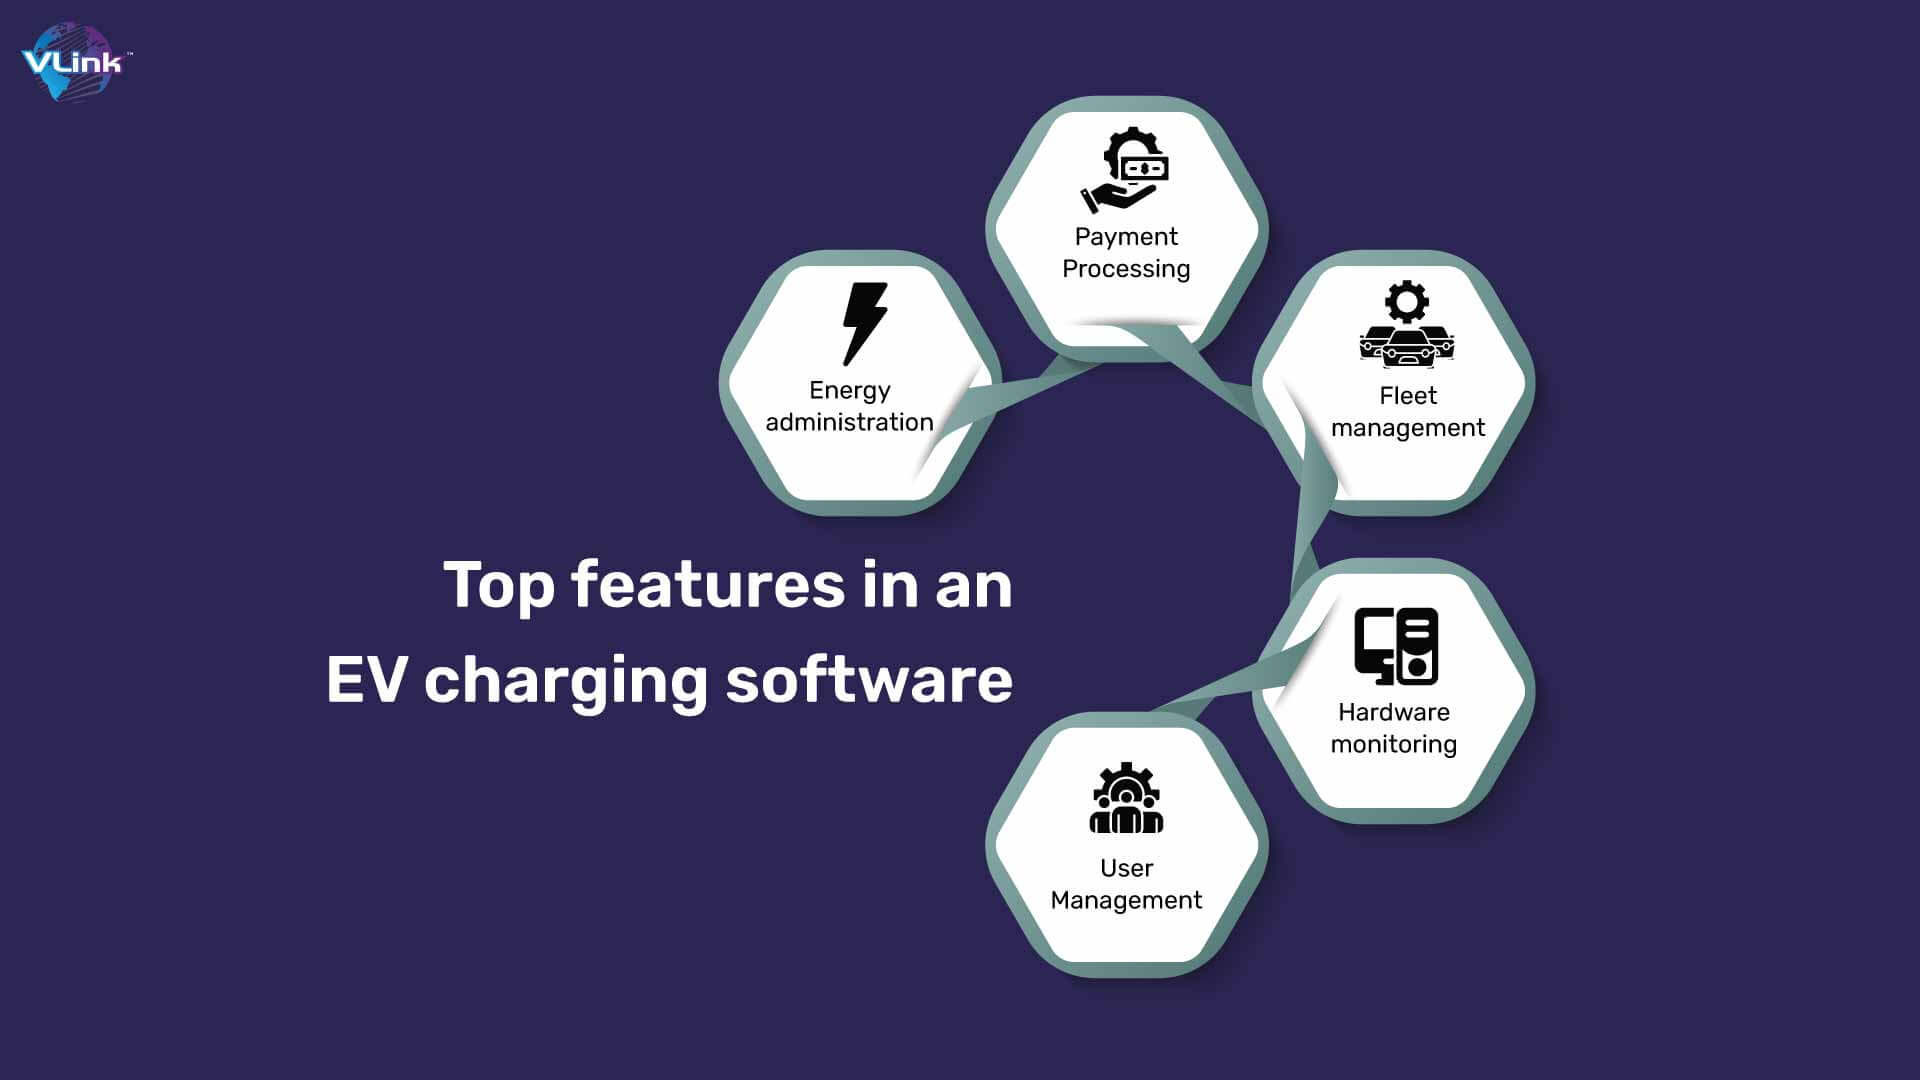 Top features in an EV charging software